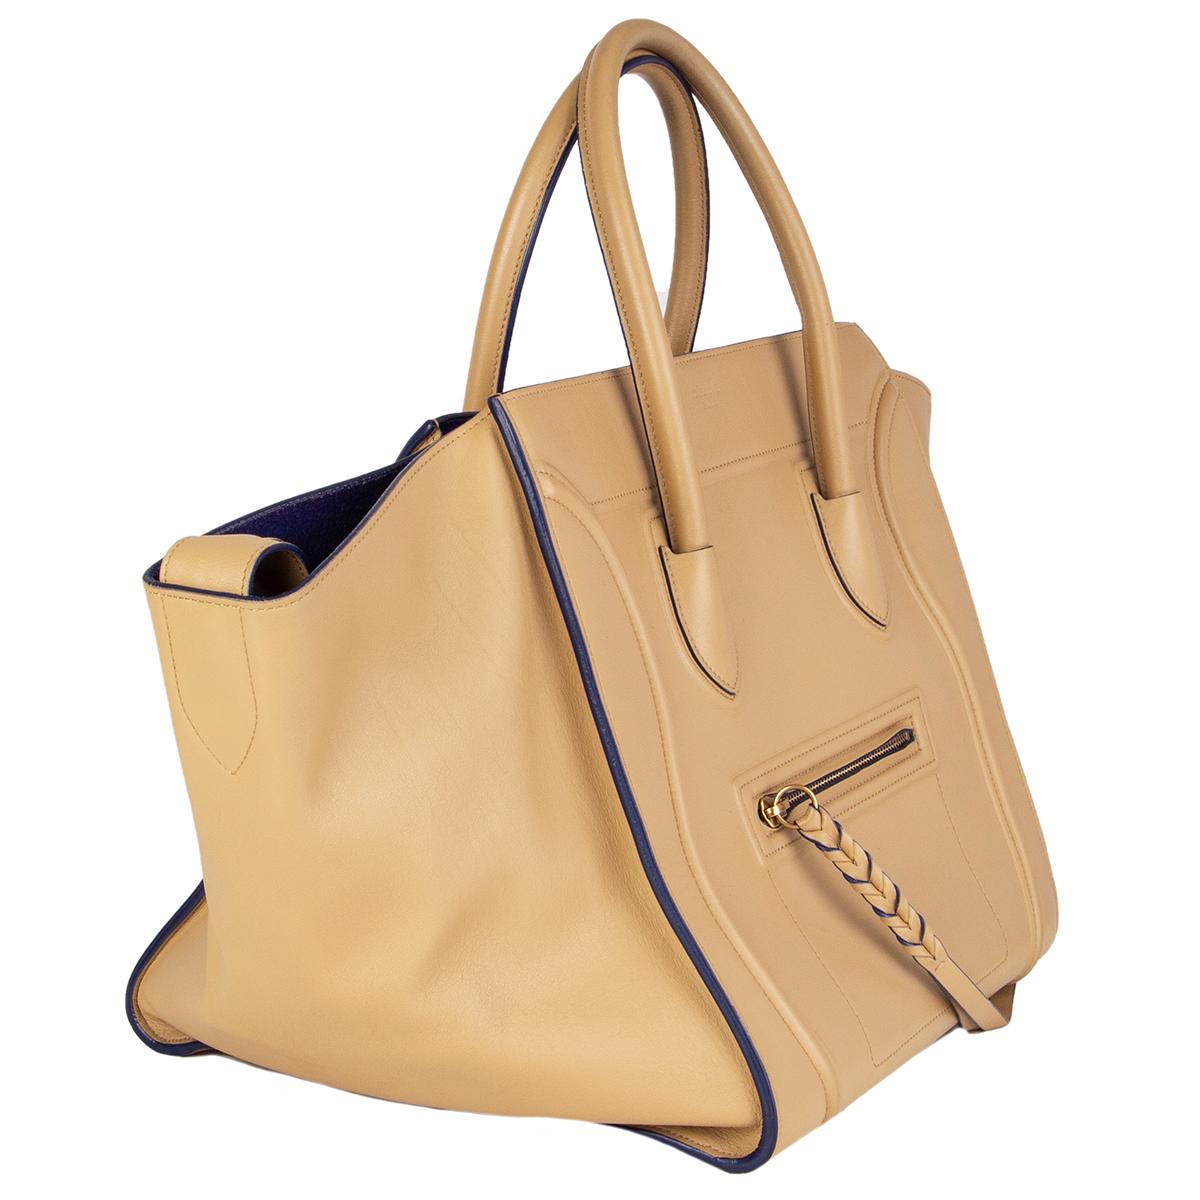 Céline 'Medium Luggage Phantom' tote bag in sand calfskin featuring a small zip front pocket. Lined in royal blue suede with one zipper pocket against the back. Has been carried with some faint darkening to the corners. Overall condition is